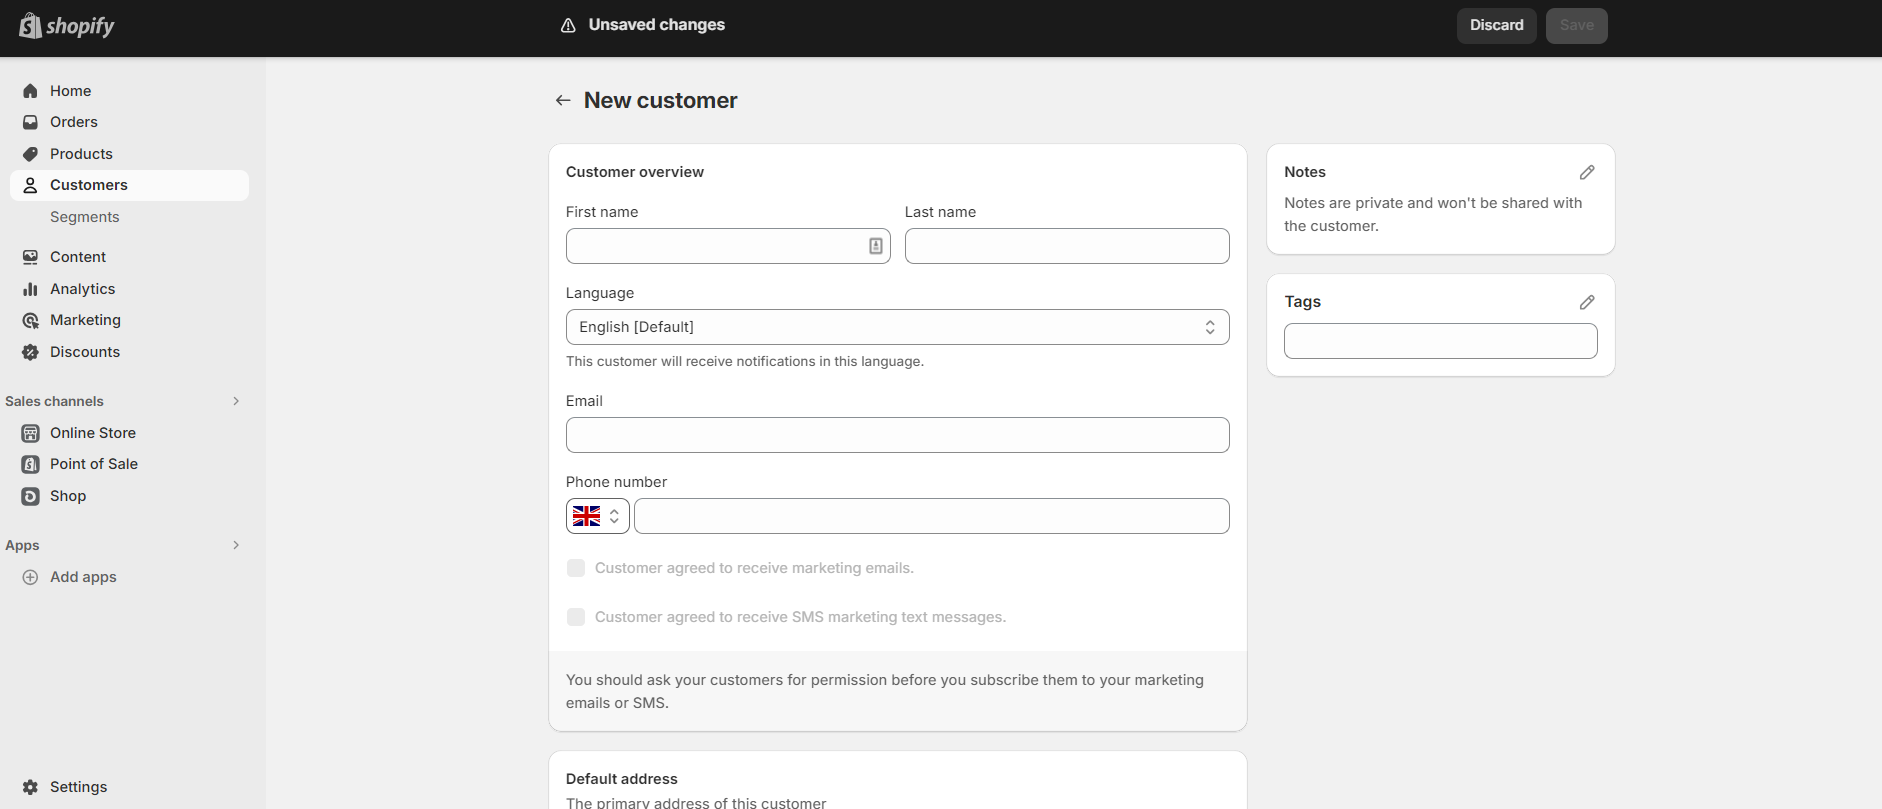 Adding customers is as simple as filling out a form, and you can even use tags to organize them. Image: Tech.co testing